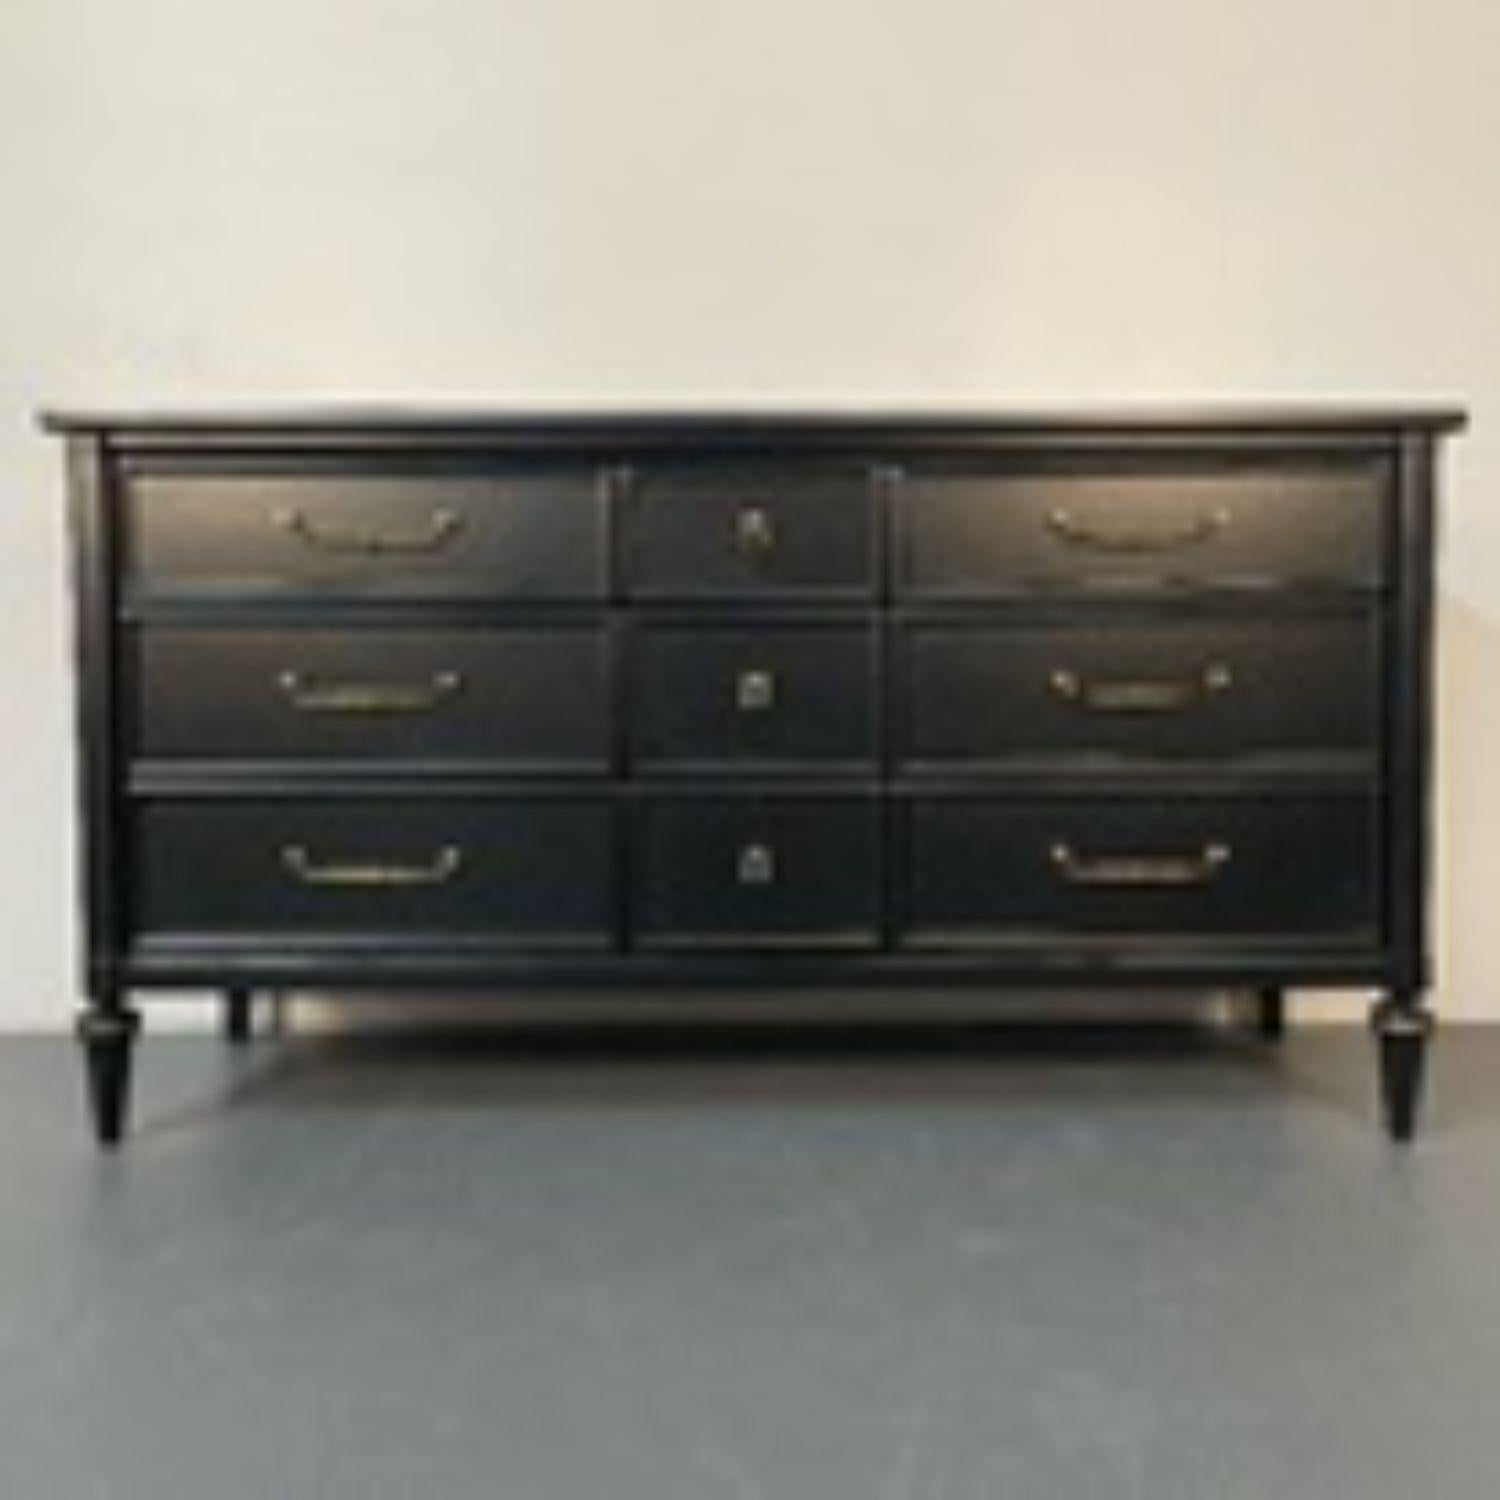 Louis XVI Black Matte Painted Dresser / Cabinet, Refinished, Brass Pulls
 
Ebony painted dresser or sideboard in the Louise XVI style having tight dovetailed drawers and brass accents. Well made case piece.
 
32.75h x 62 x 20d